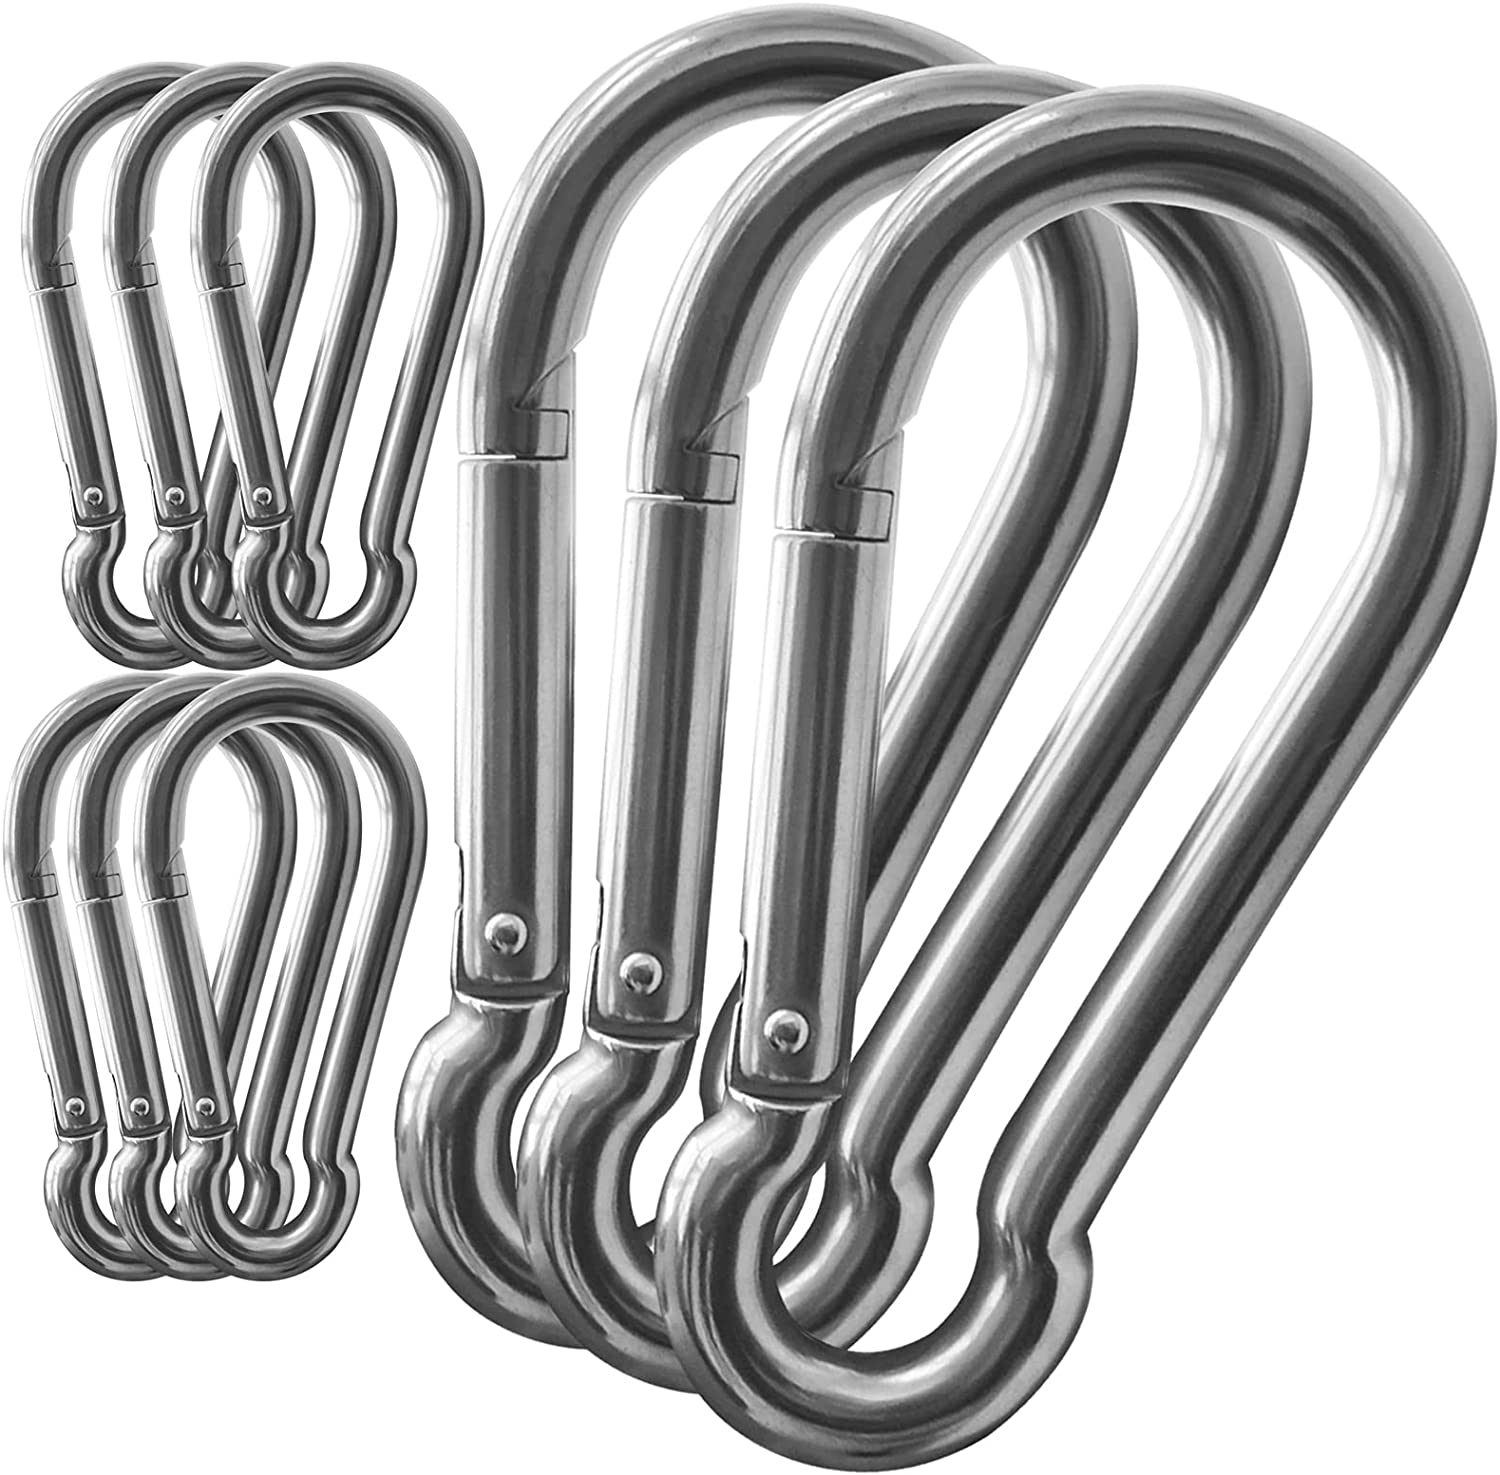 10Pack 5.5 Inch Spring Snap Hooks, Heavy Duty Carabiner Clips for